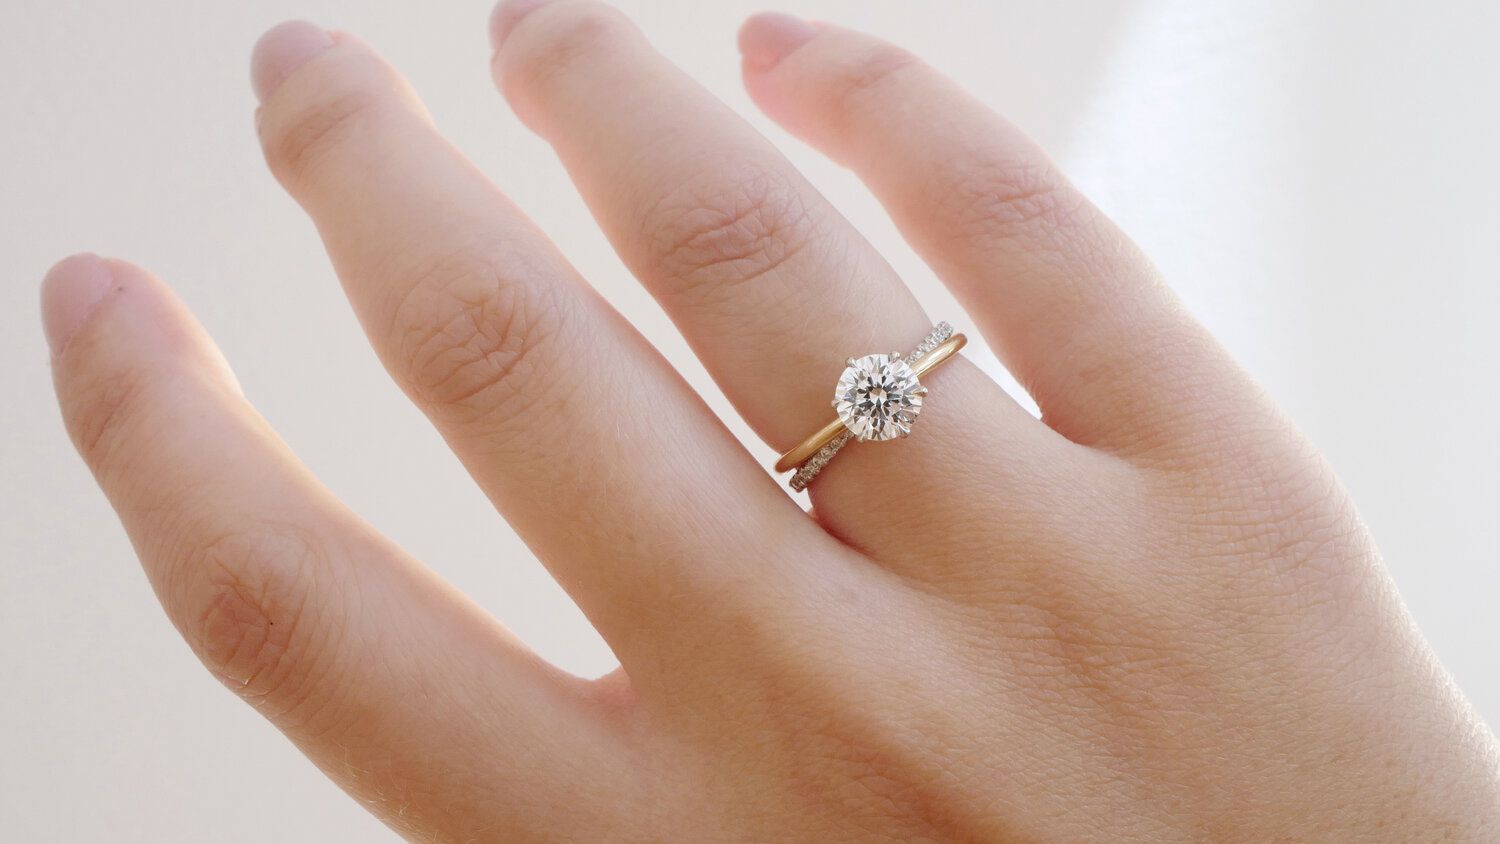 Diamond Shape Ring: The Best Wedding Band for You